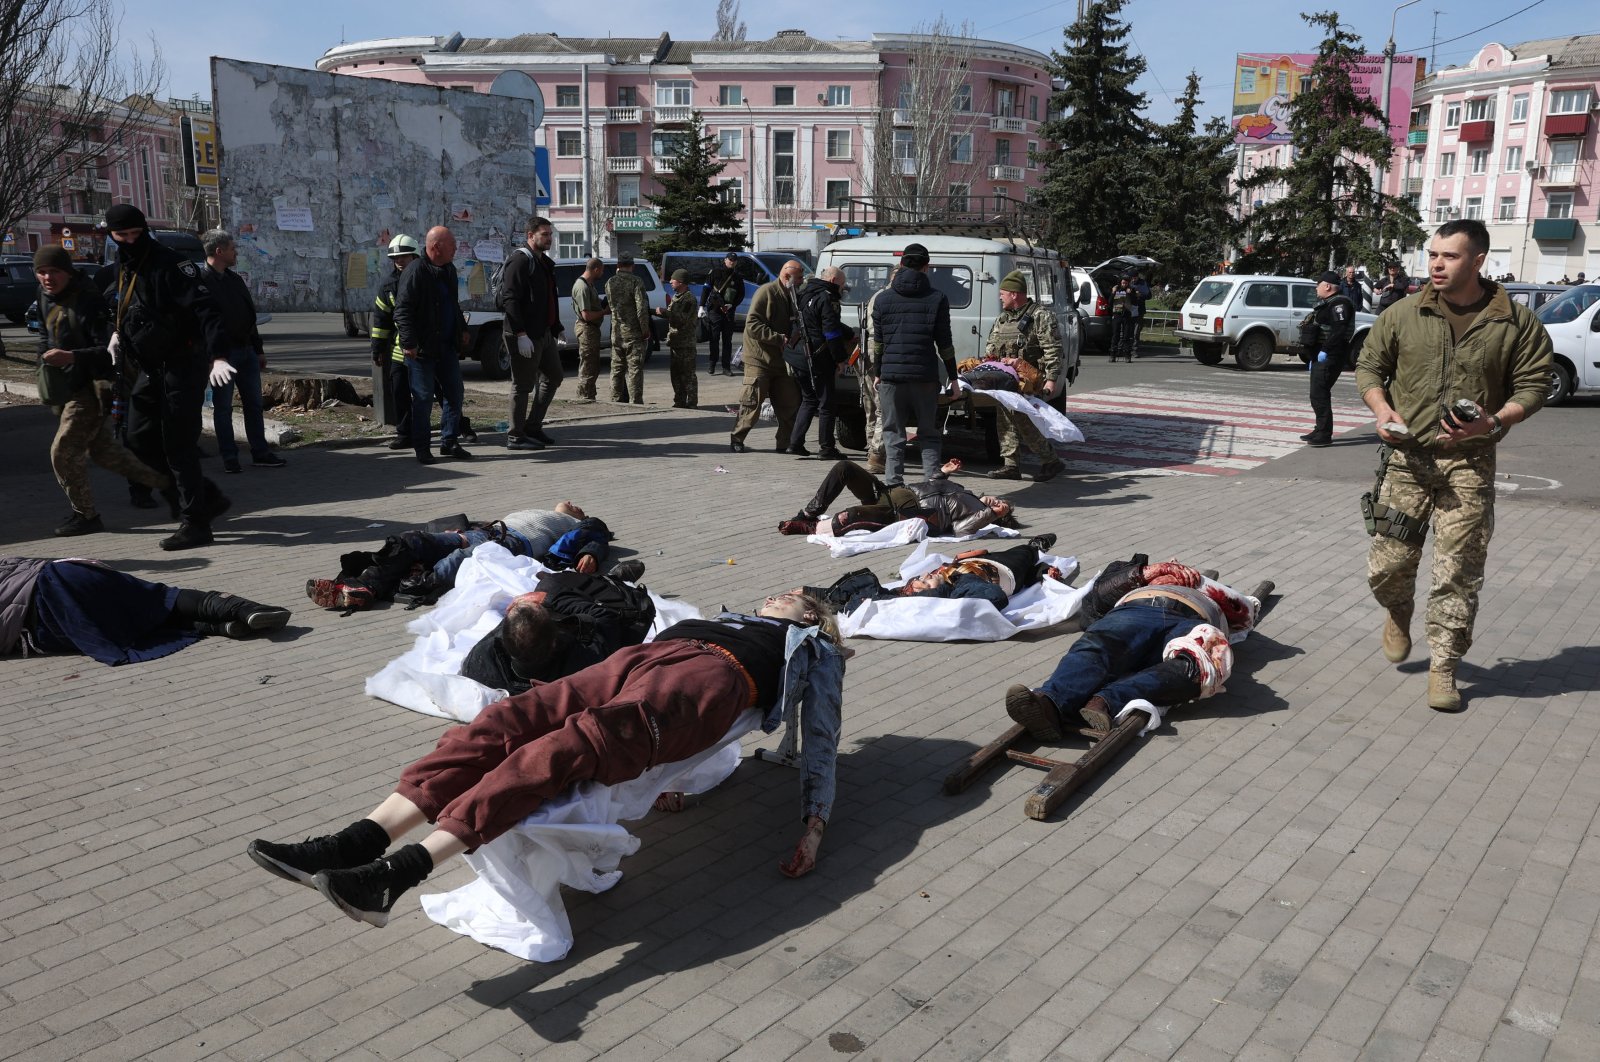 Ukrainian servicemen and emergency personnel tend to victims in the aftermath of a rocket attack on the railway station in the eastern city of Kramatorsk, in the Donbass region in eastern Ukraine, on April 8, 2022. (AFP Photo)